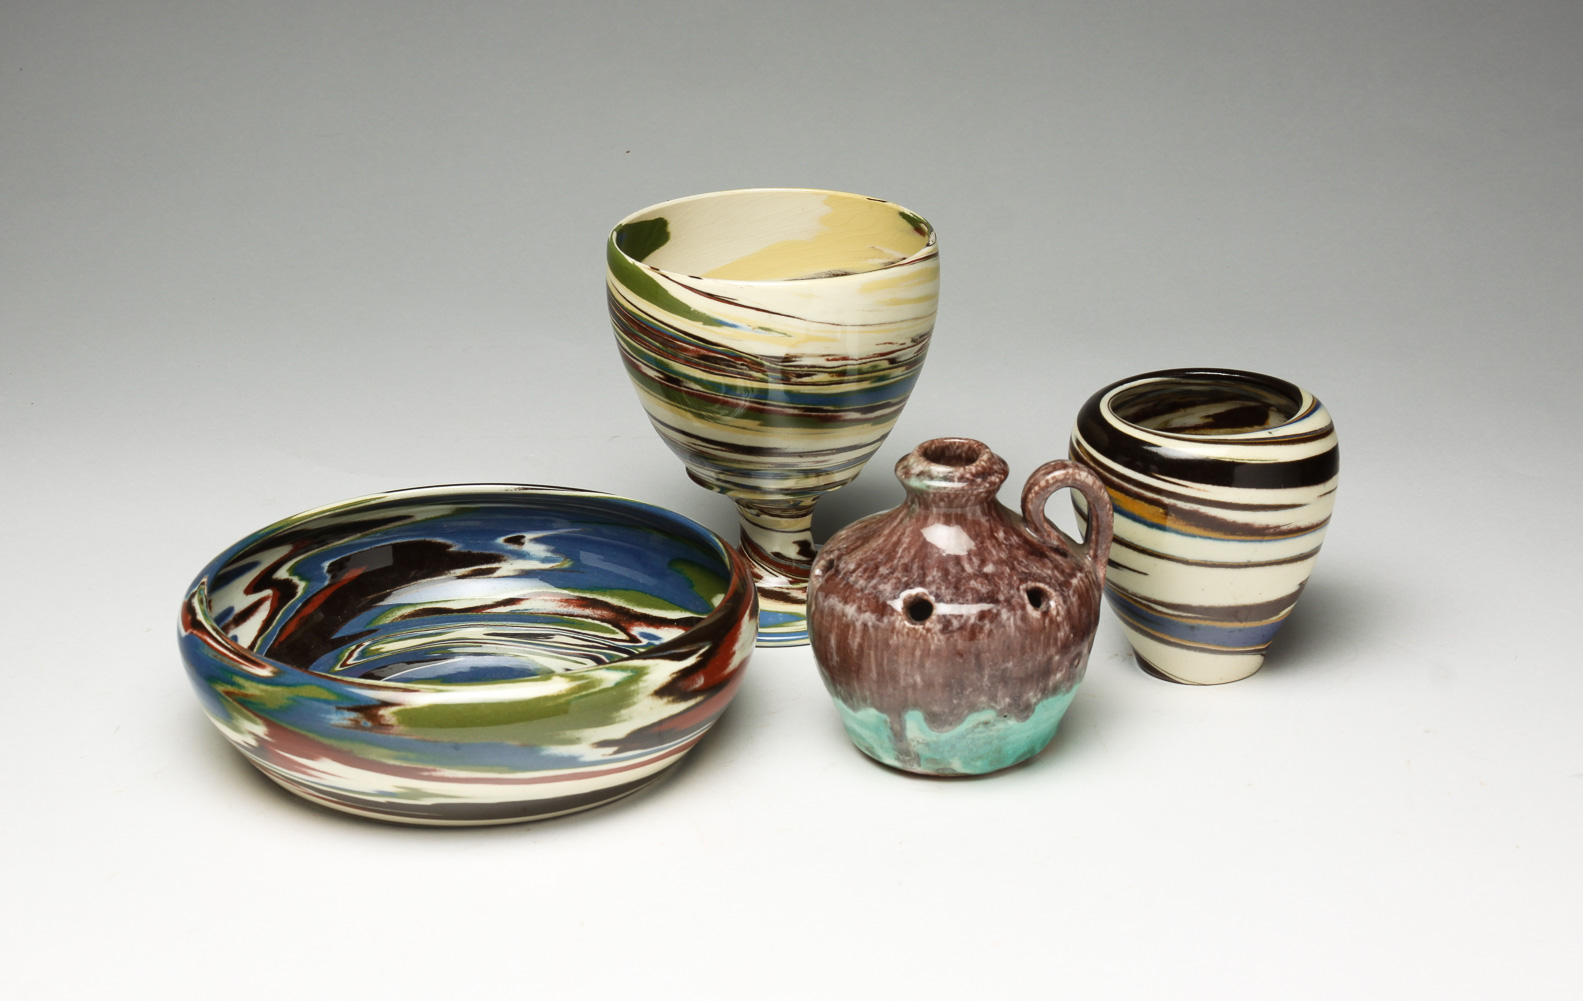 FOUR PIECES OF AMERICAN ART POTTERY.